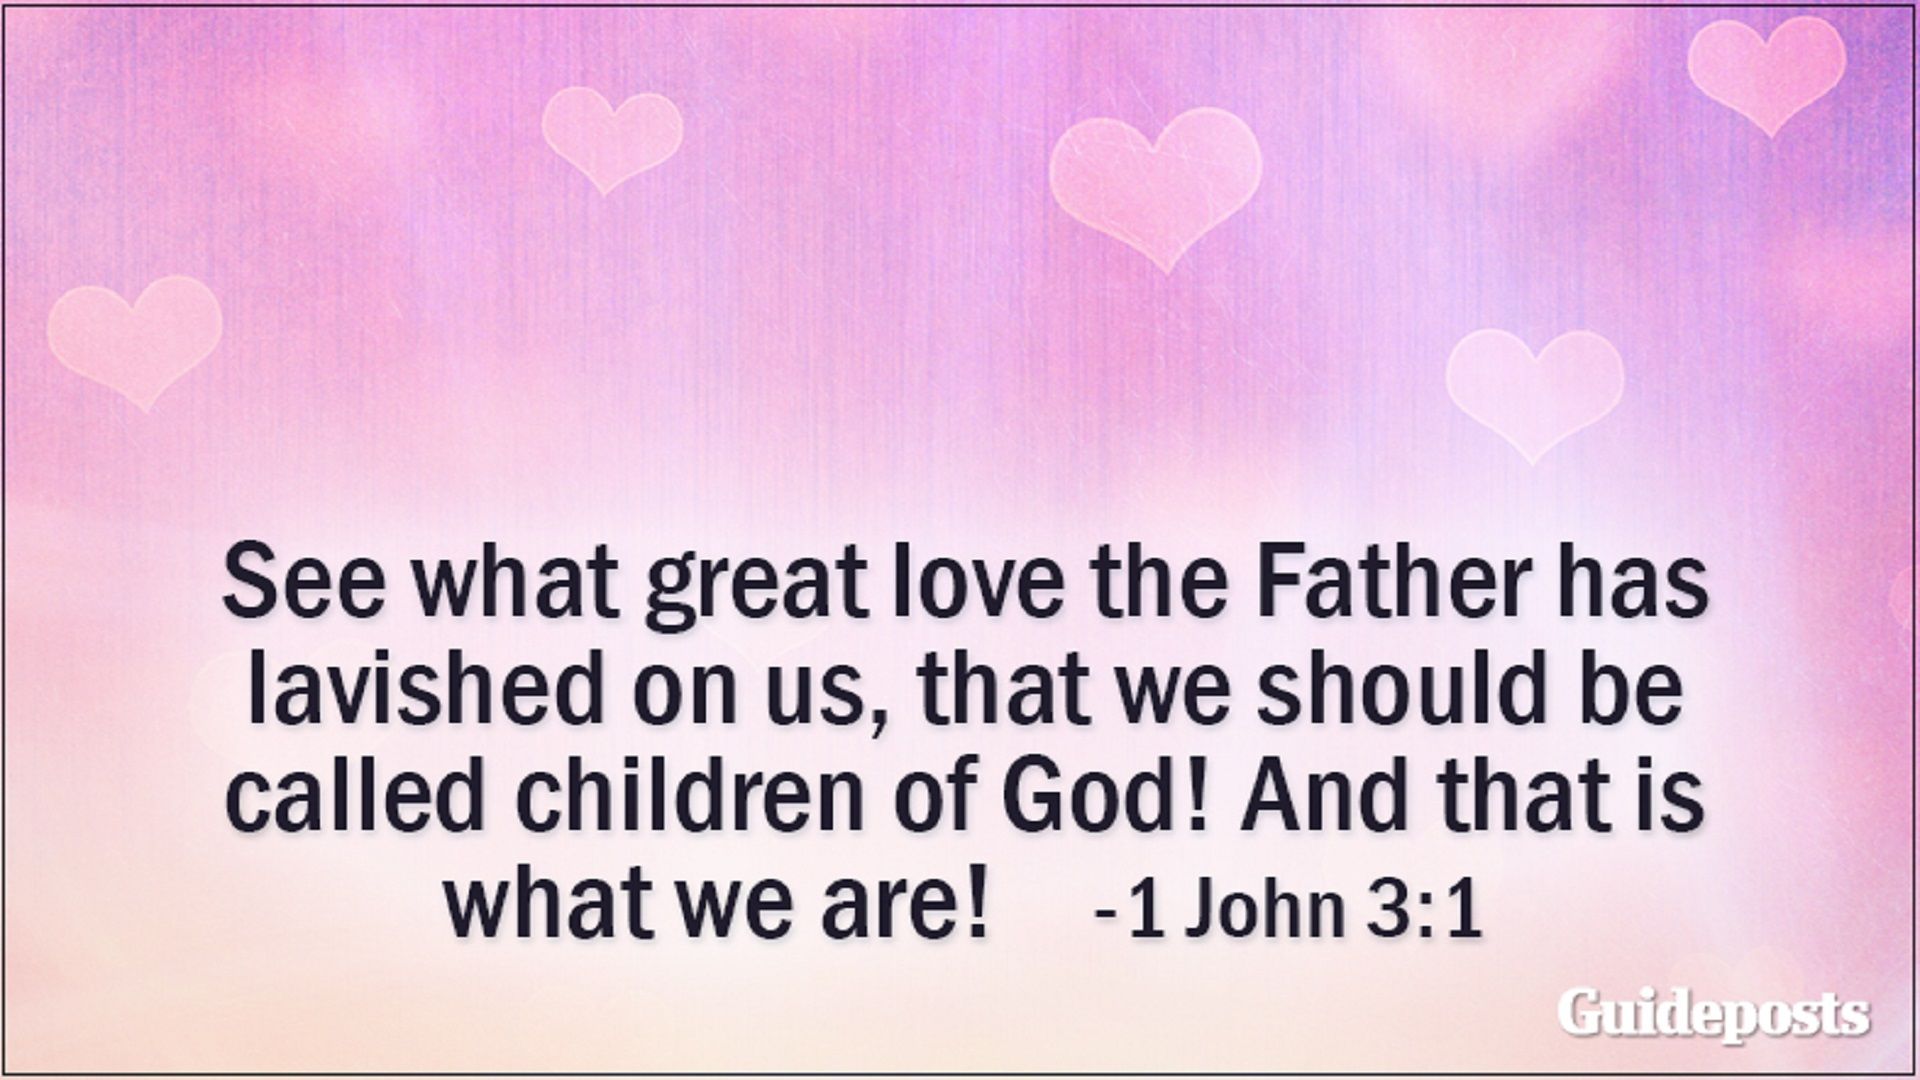 See what great love the Father has lavished on us, that we should be called children of God! And that is what we are! 1 John 3:1